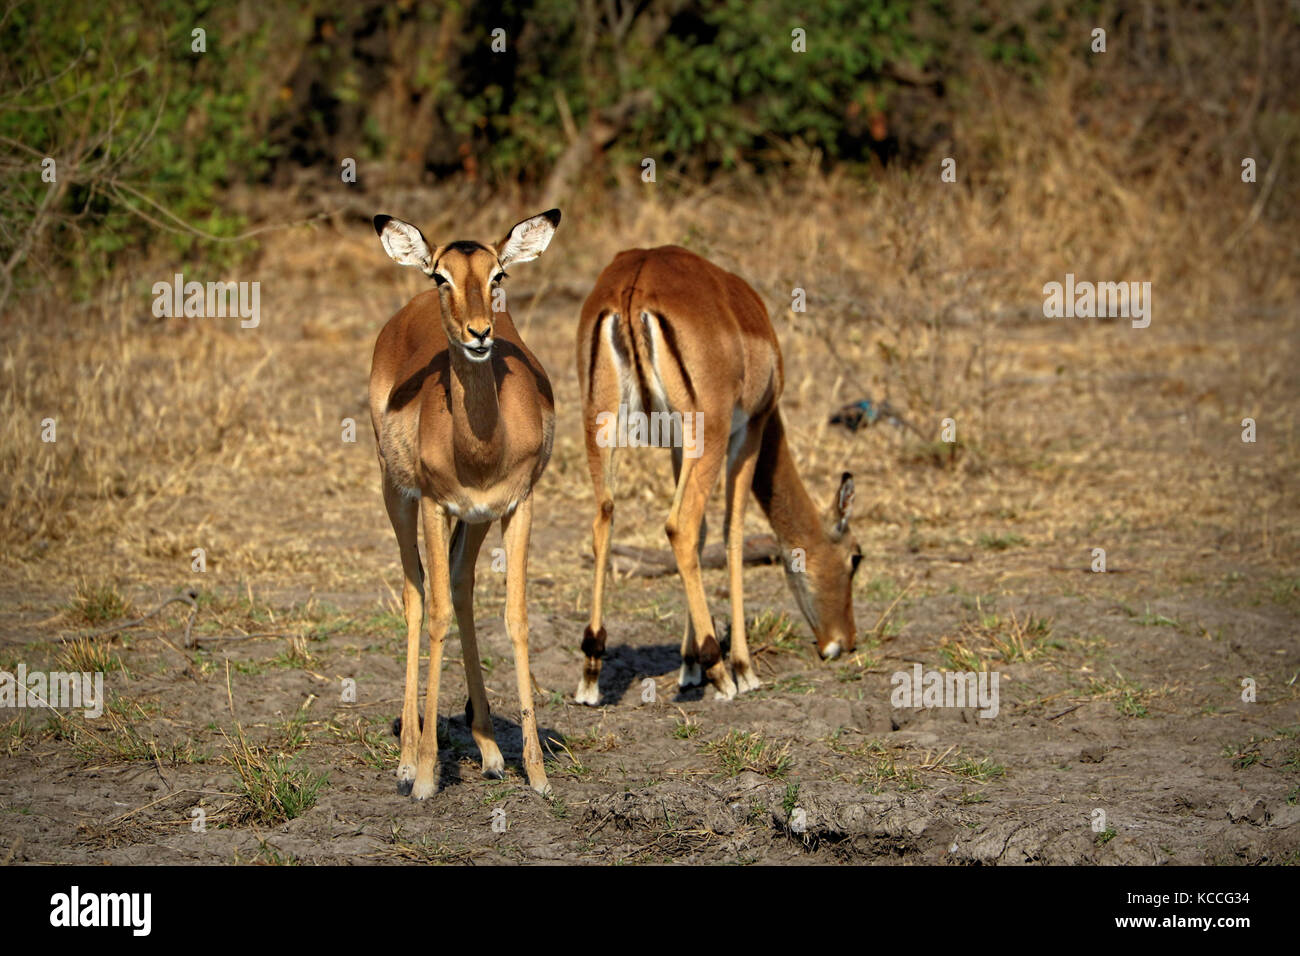 Antelopes (Impala) in the Kruger National Park, South Africa Stock Photo